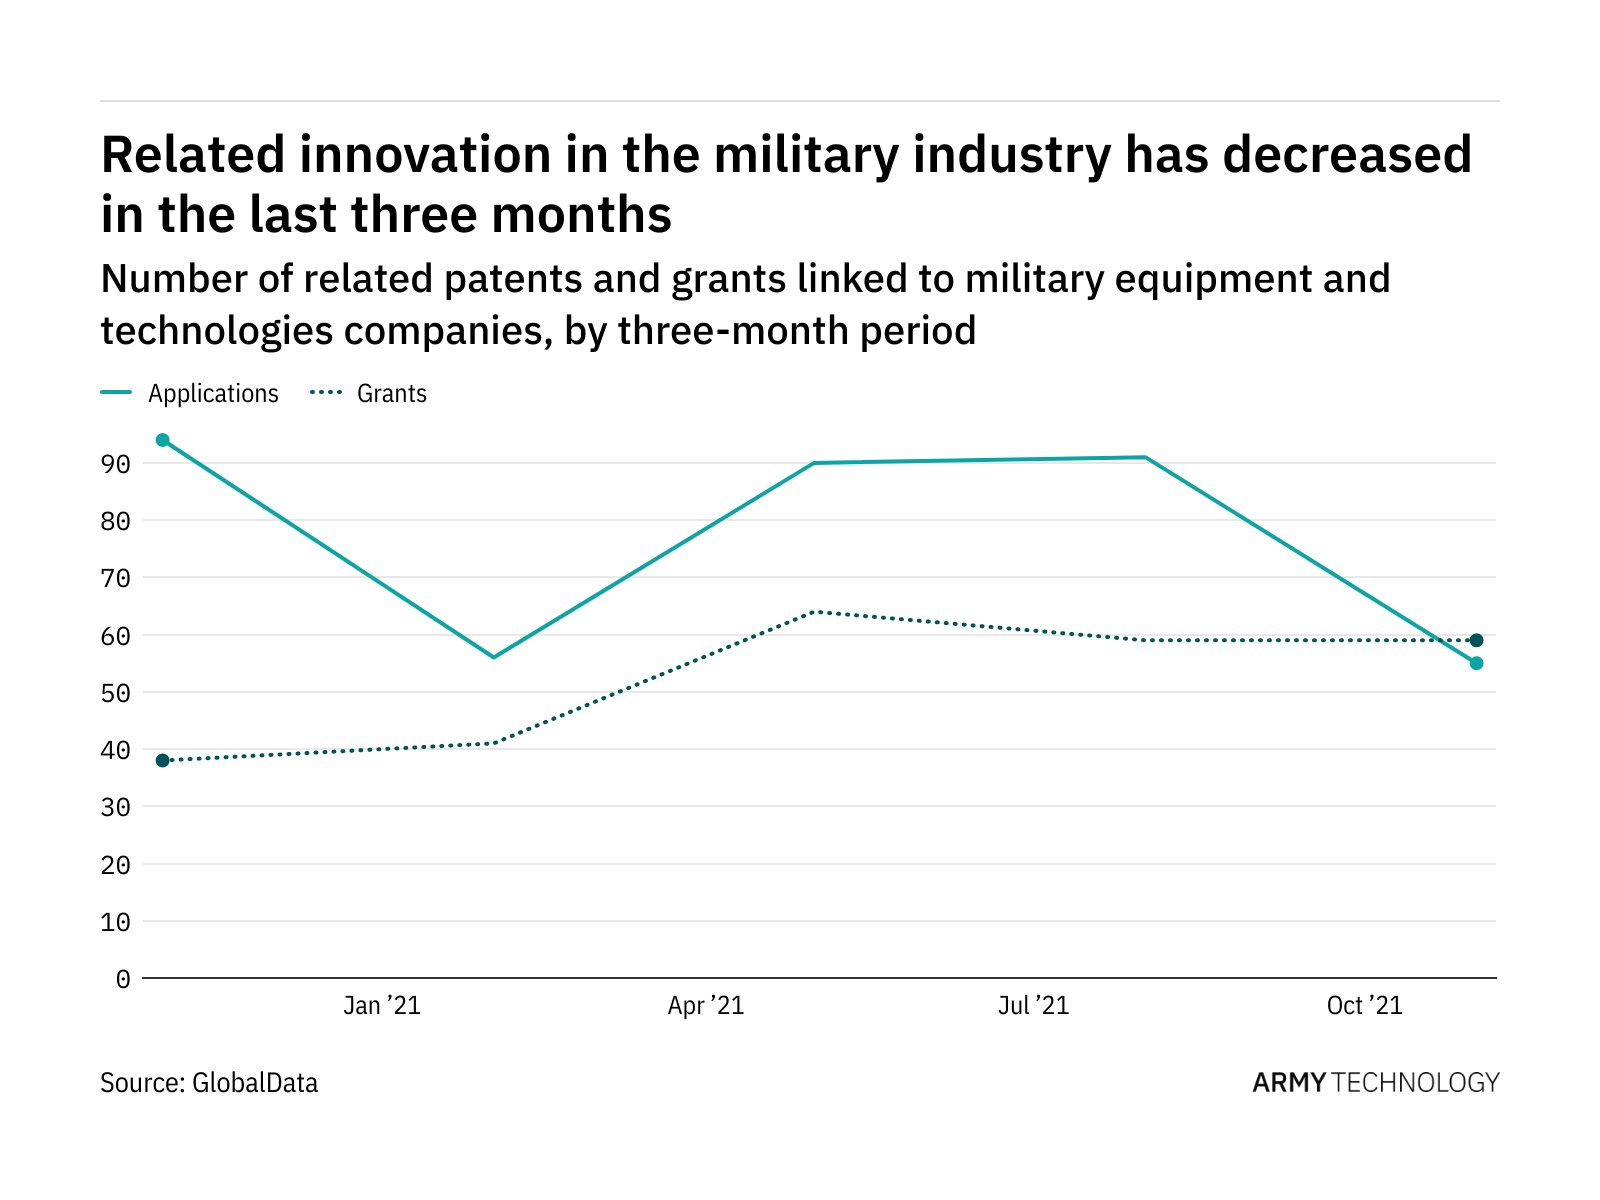 Cybersecurity innovation among military industry companies has dropped off in the last year